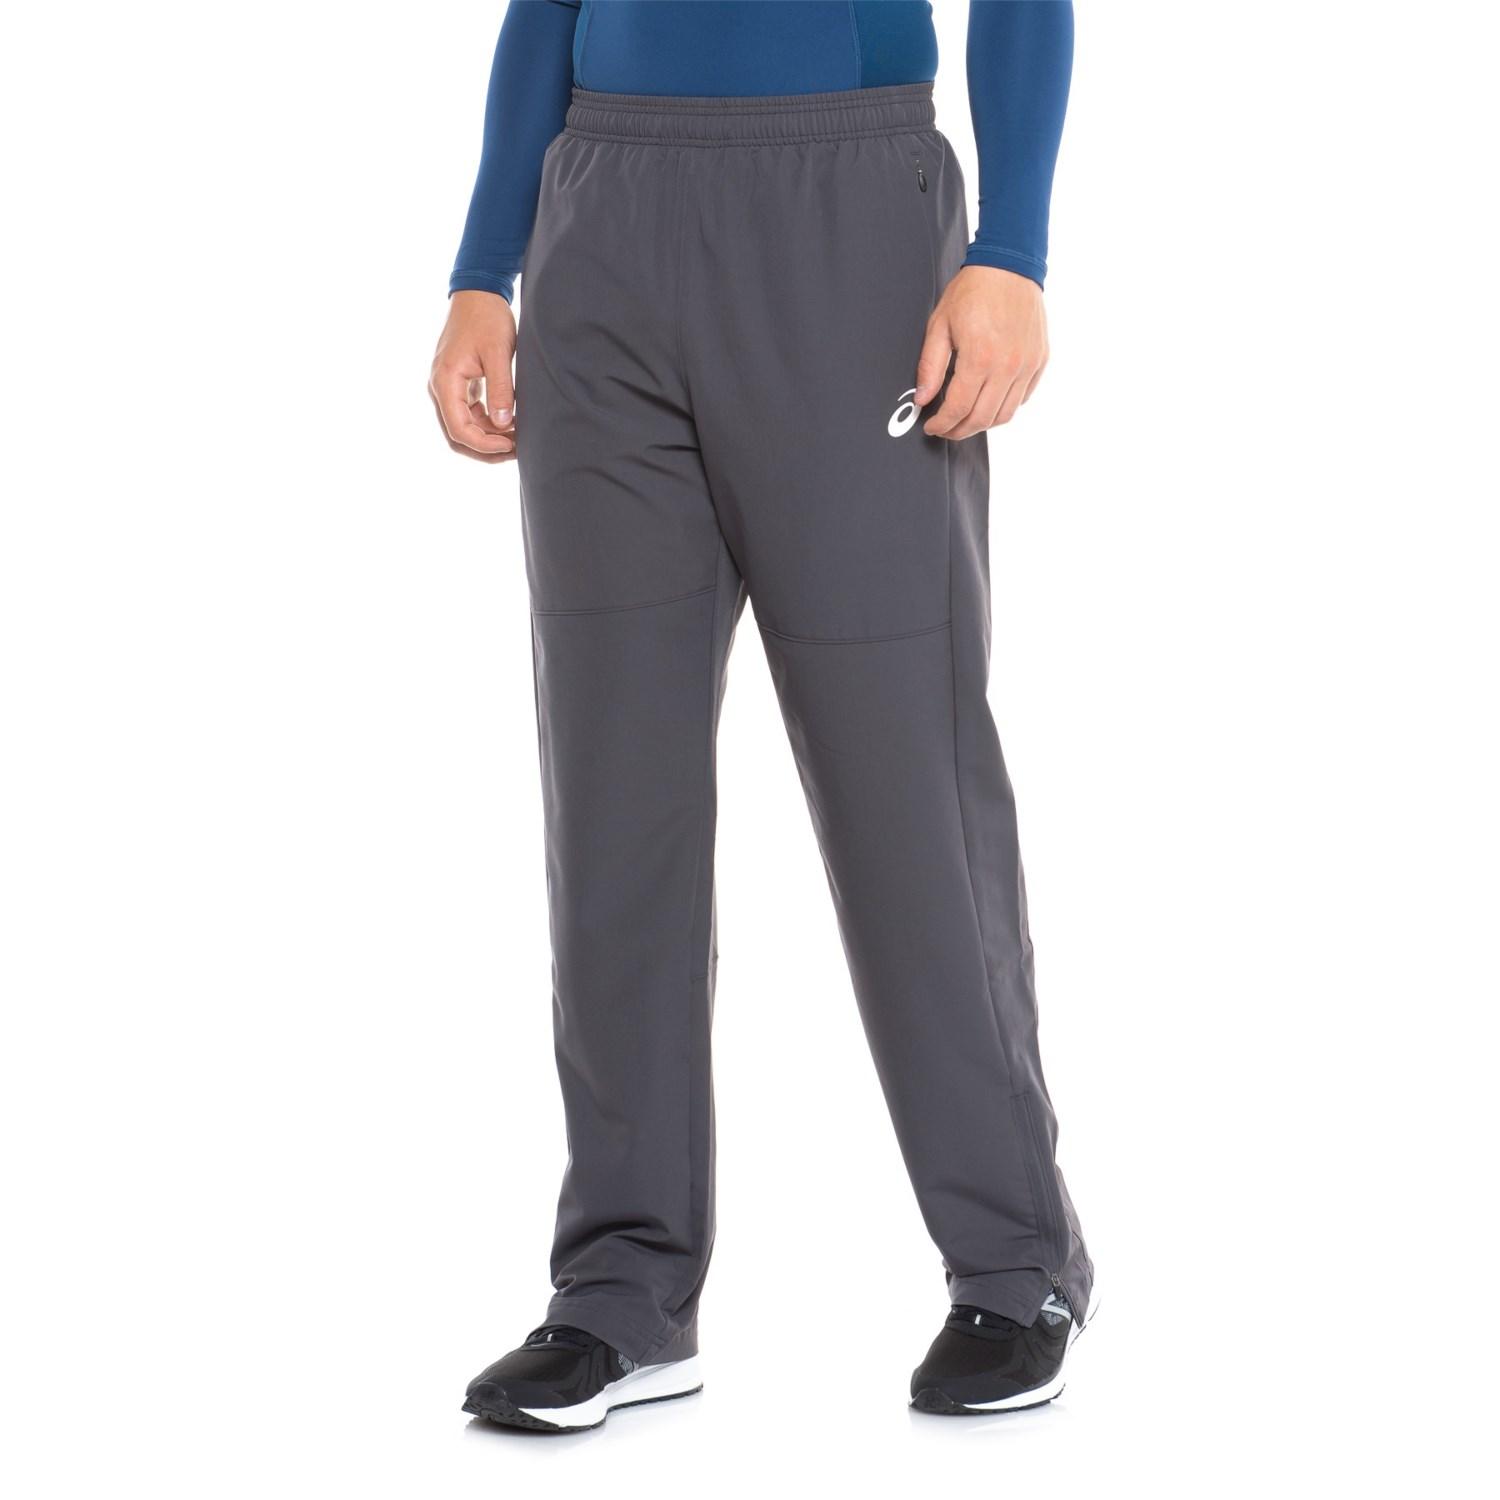 Asics Synthetic Team Battle Pants in 